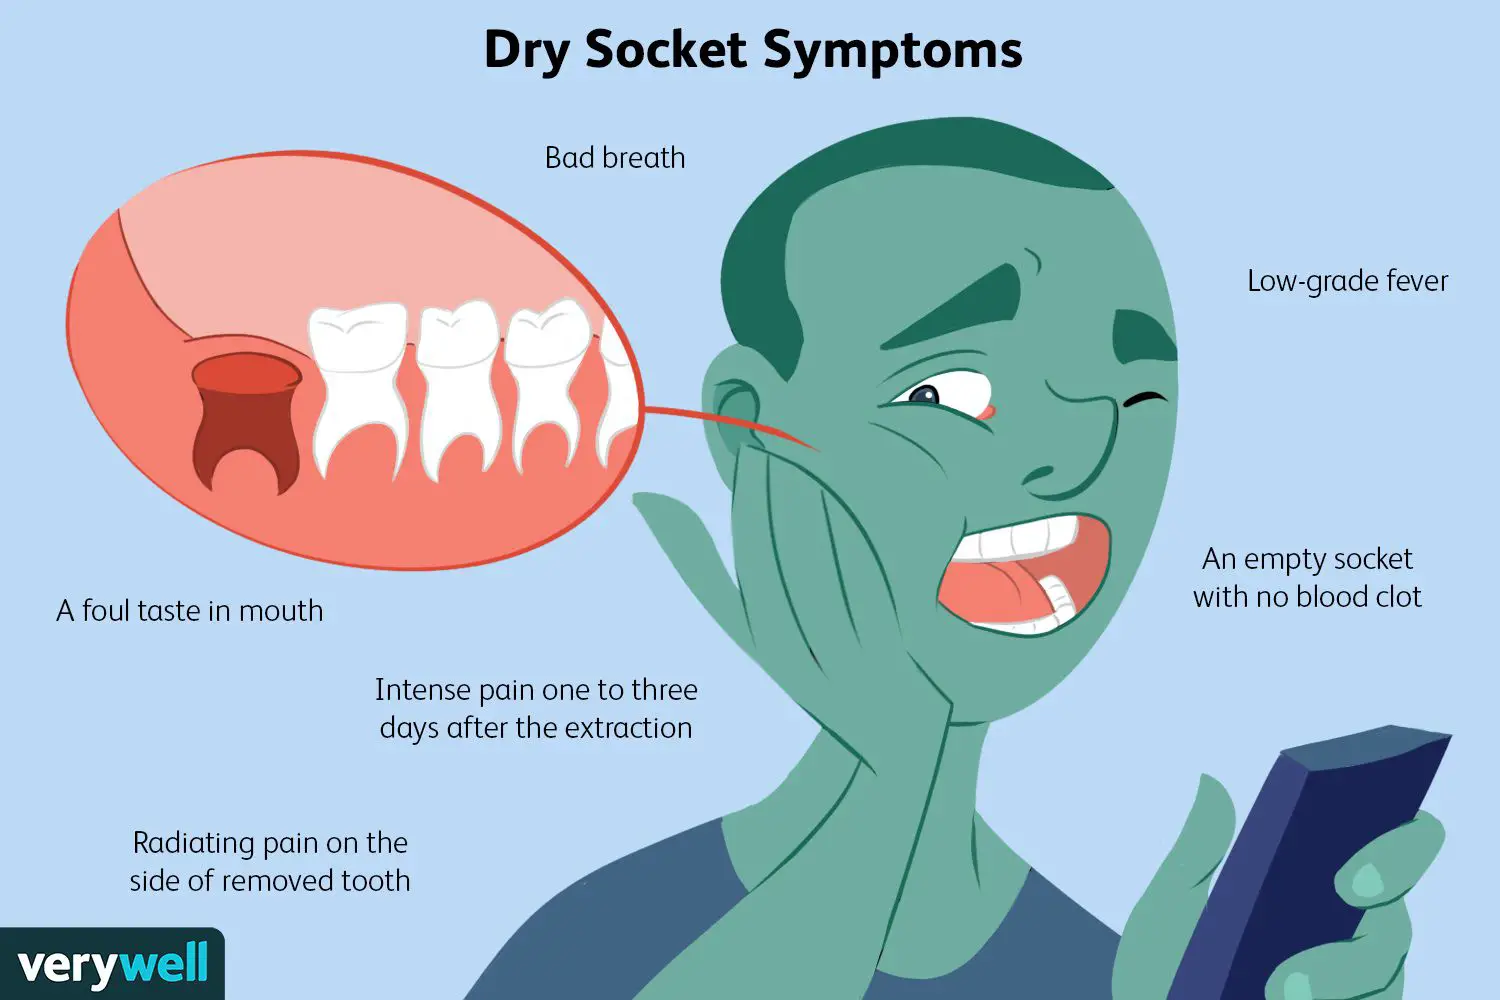 how to prevent dry socket after tooth extraction